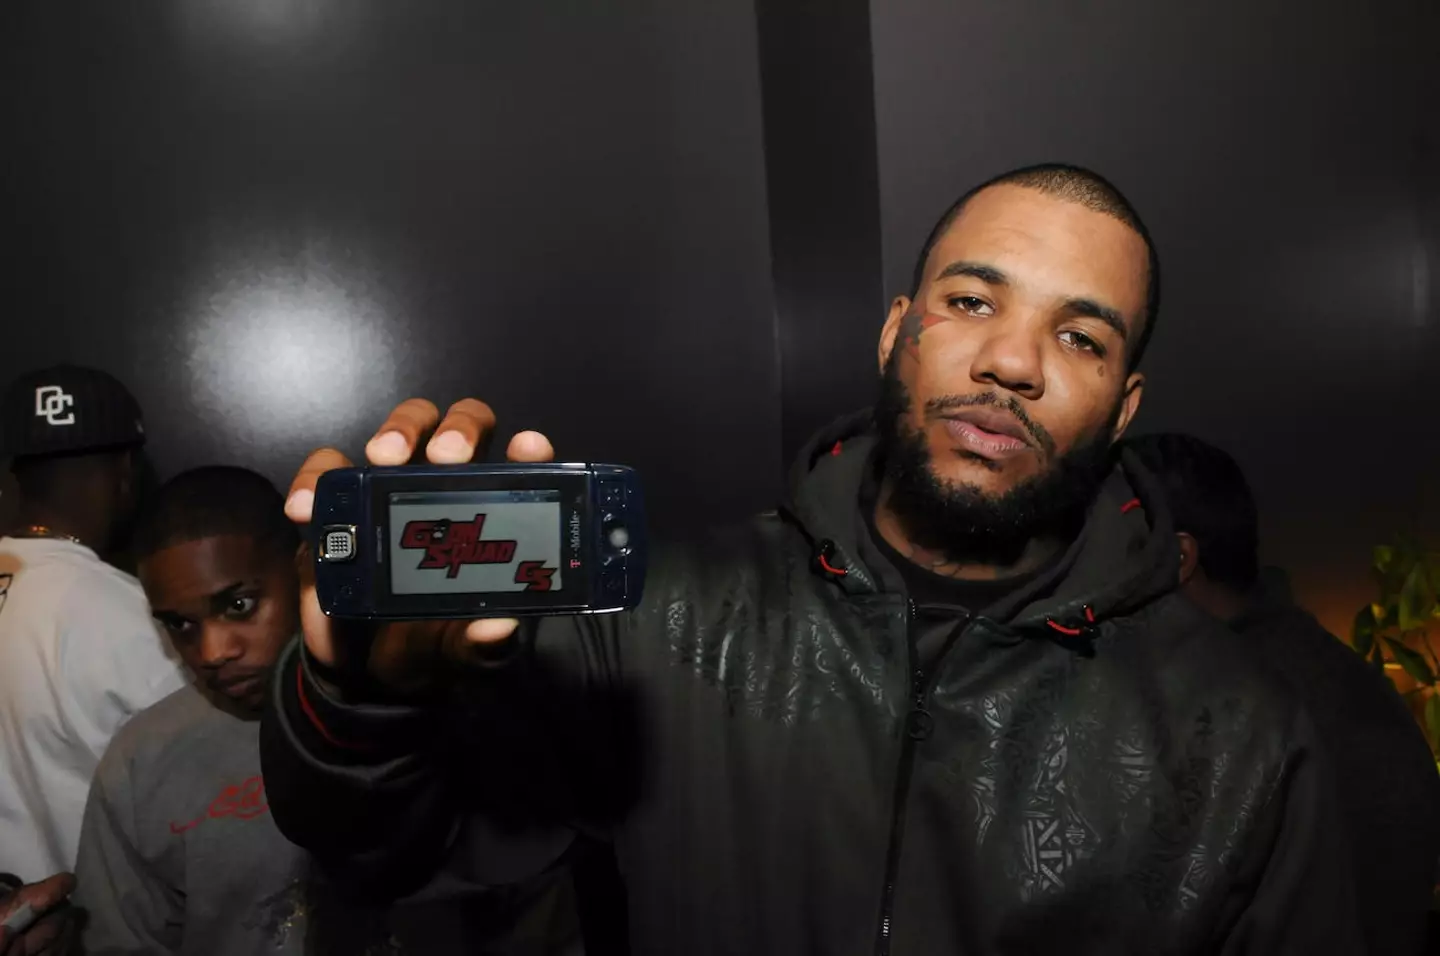 The Game has released his 10th studio album Drillmatic: Heart vs. Mind and has taken some 'big' shots at Eminem in a whopping 10-minute diss track.